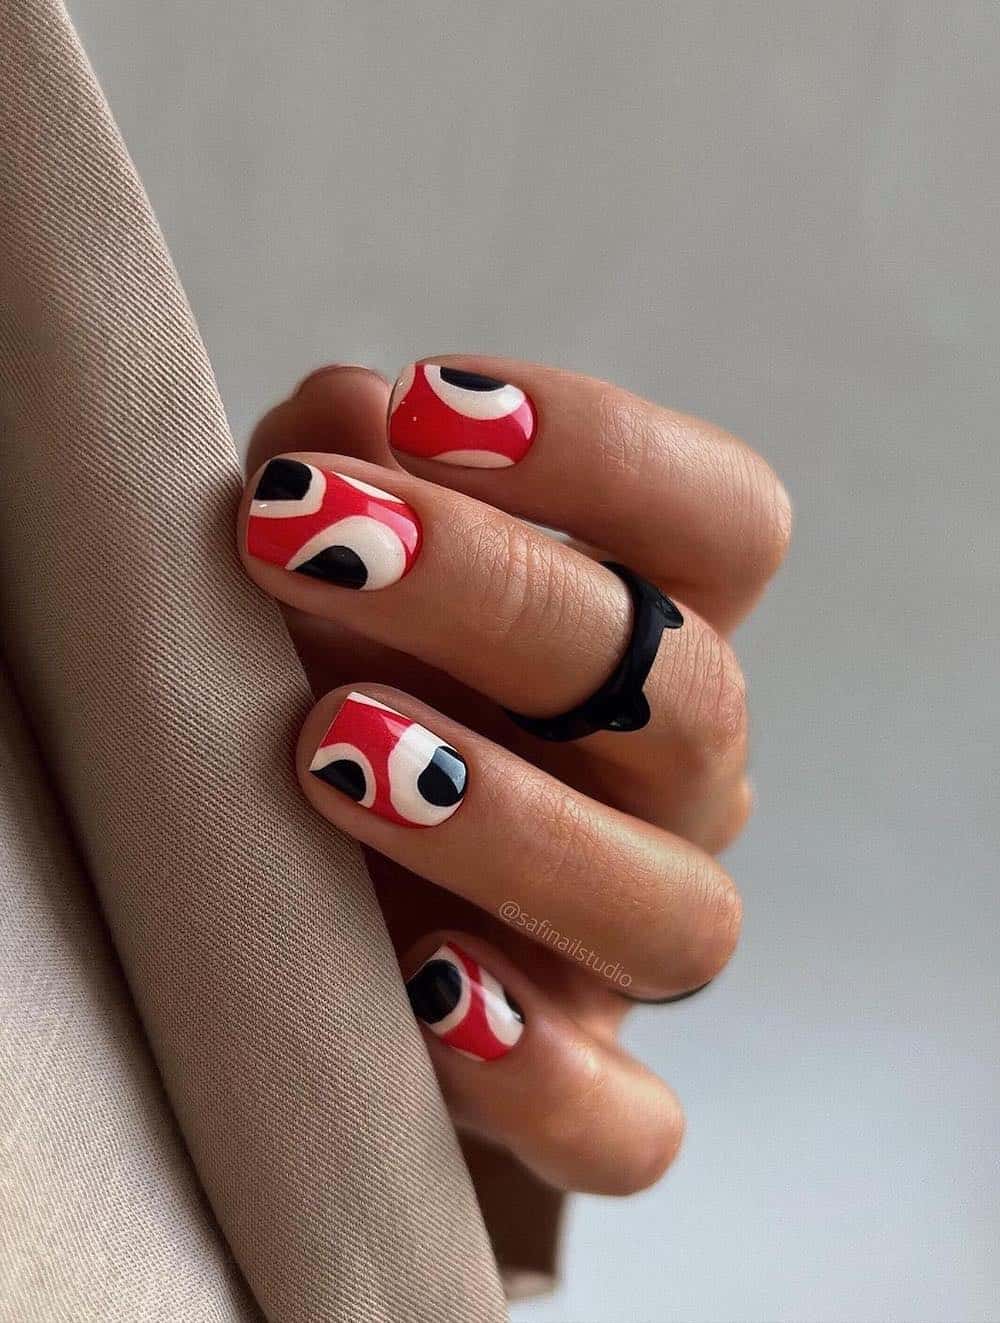 Red, white and black polka dot manicure.